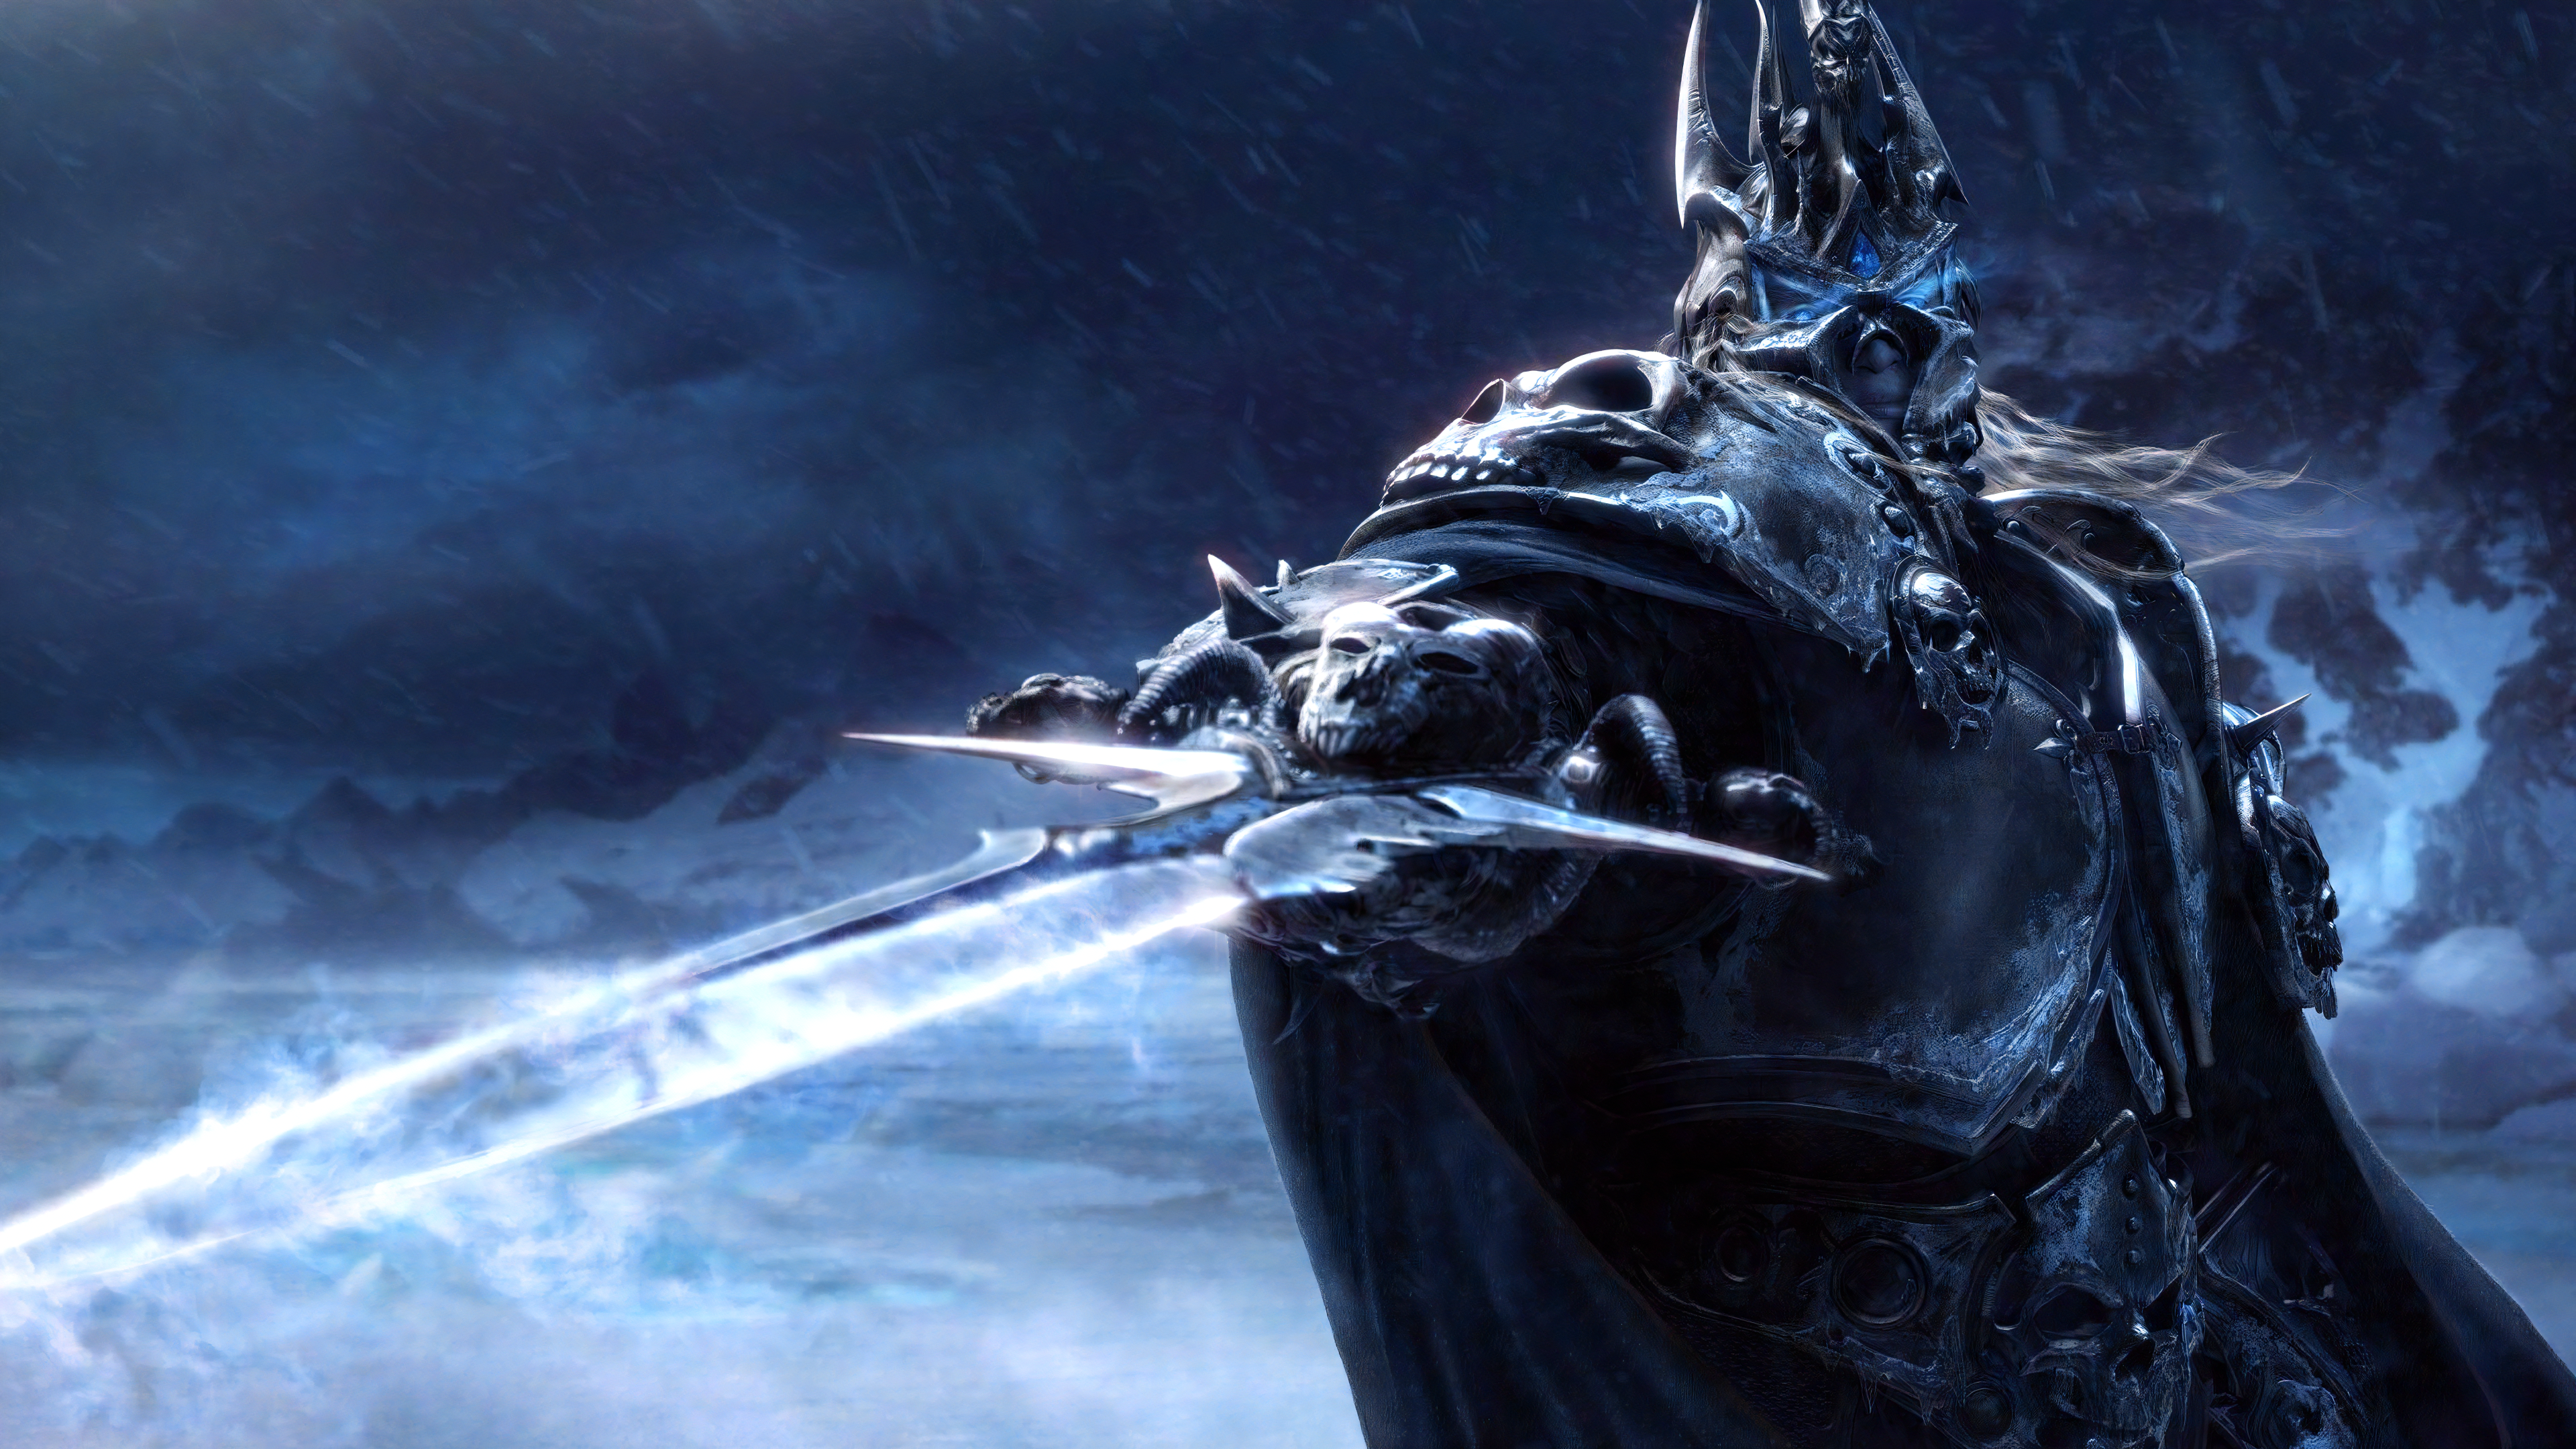 General 3840x2160 World of Warcraft: Wrath of the Lich King Blizzard Entertainment digital art upscaled Arthas Menethil Lich King World of Warcraft rain sword glowing eyes video game characters video game art armor video games wind